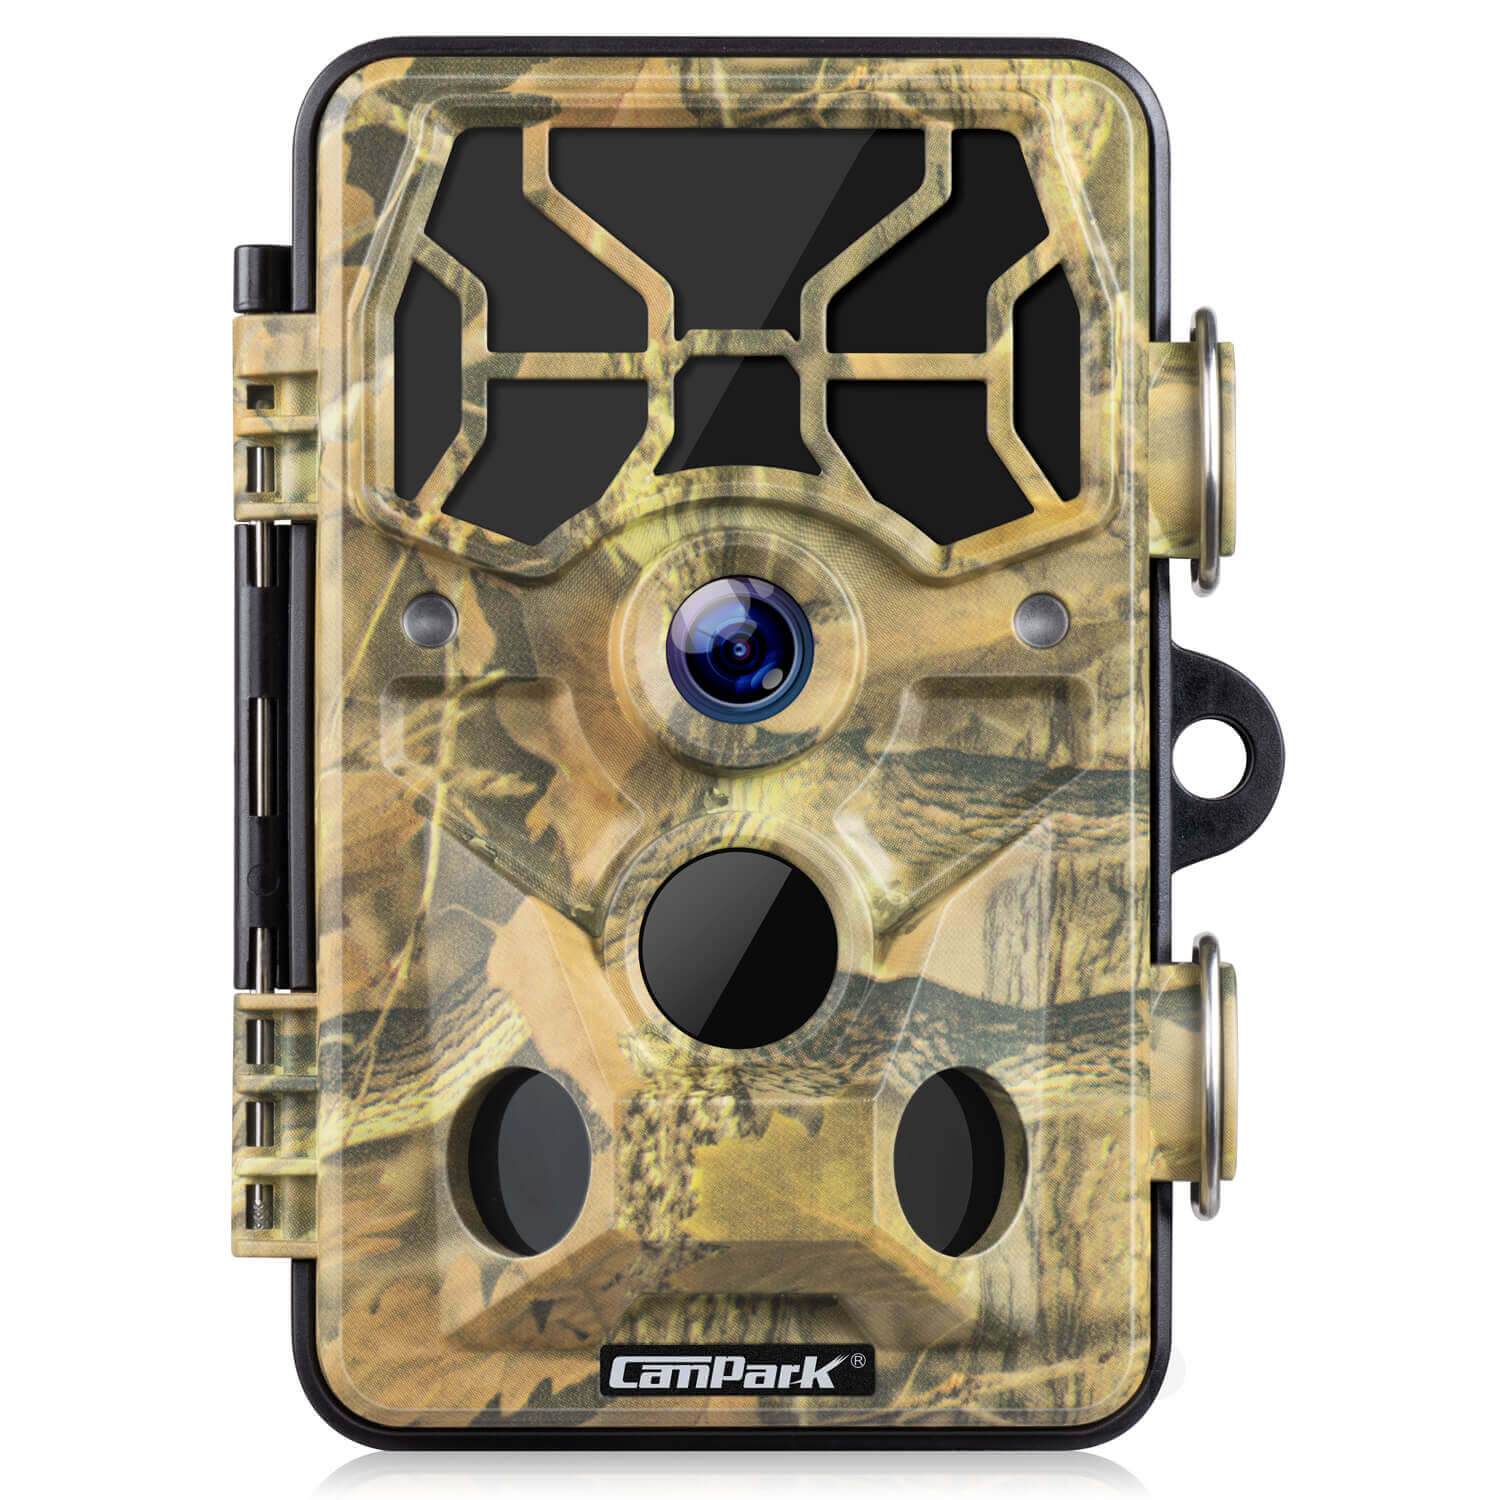 Campark T80 Trail Camera-WiFi 24MP 1296P Hunting Game Camera(Only sold in the UK, AU, and CA)